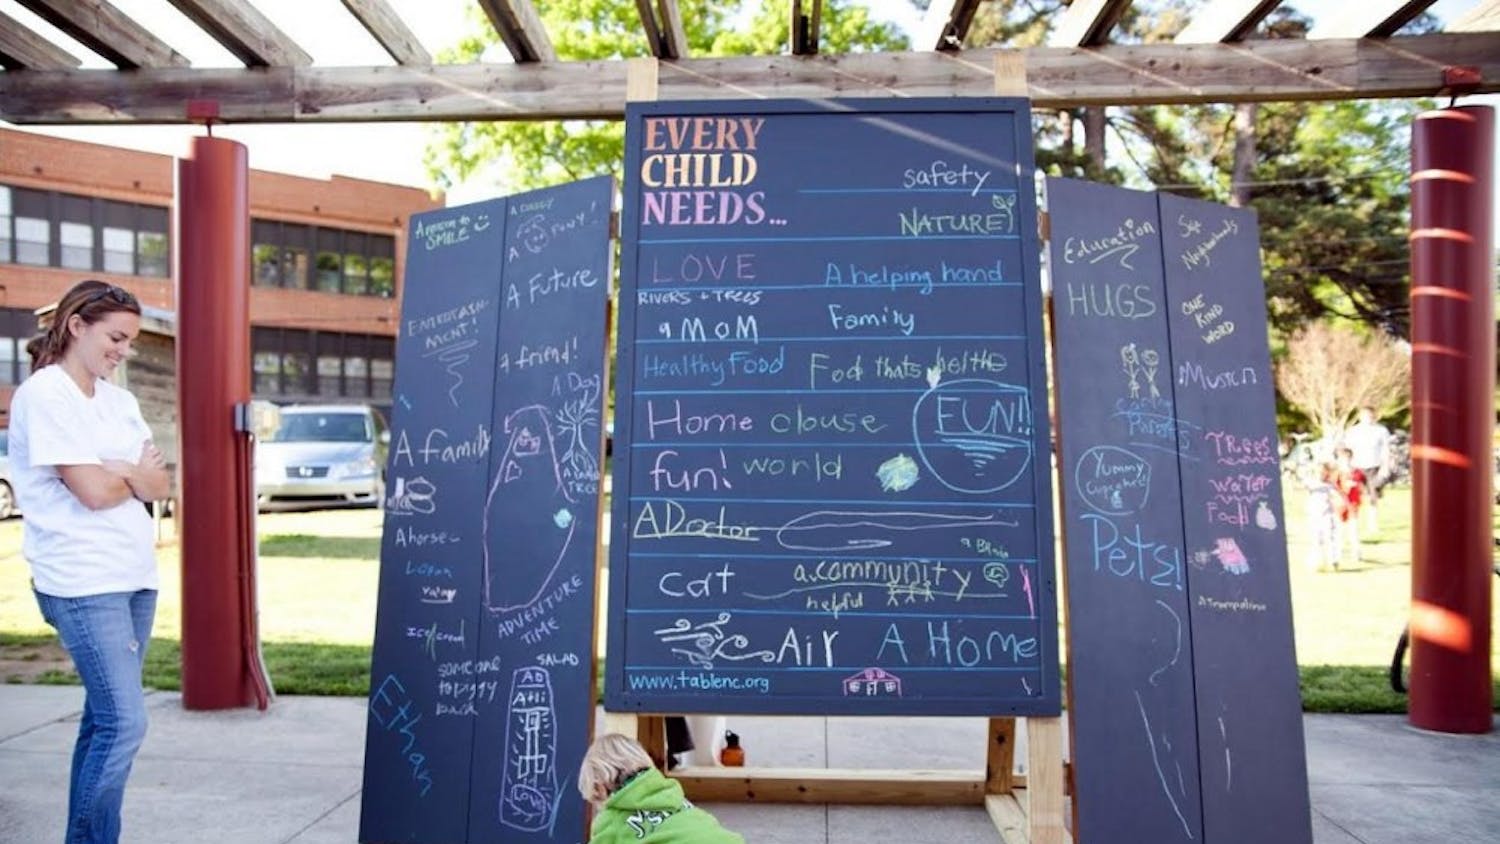 TABLE is a local nonprofit that focuses on providing healthy food and snacks for children in insecure food situations in the Chapel Hill/ Carrboro area. Photo Courtesy of Rachel Eve Horowitz.